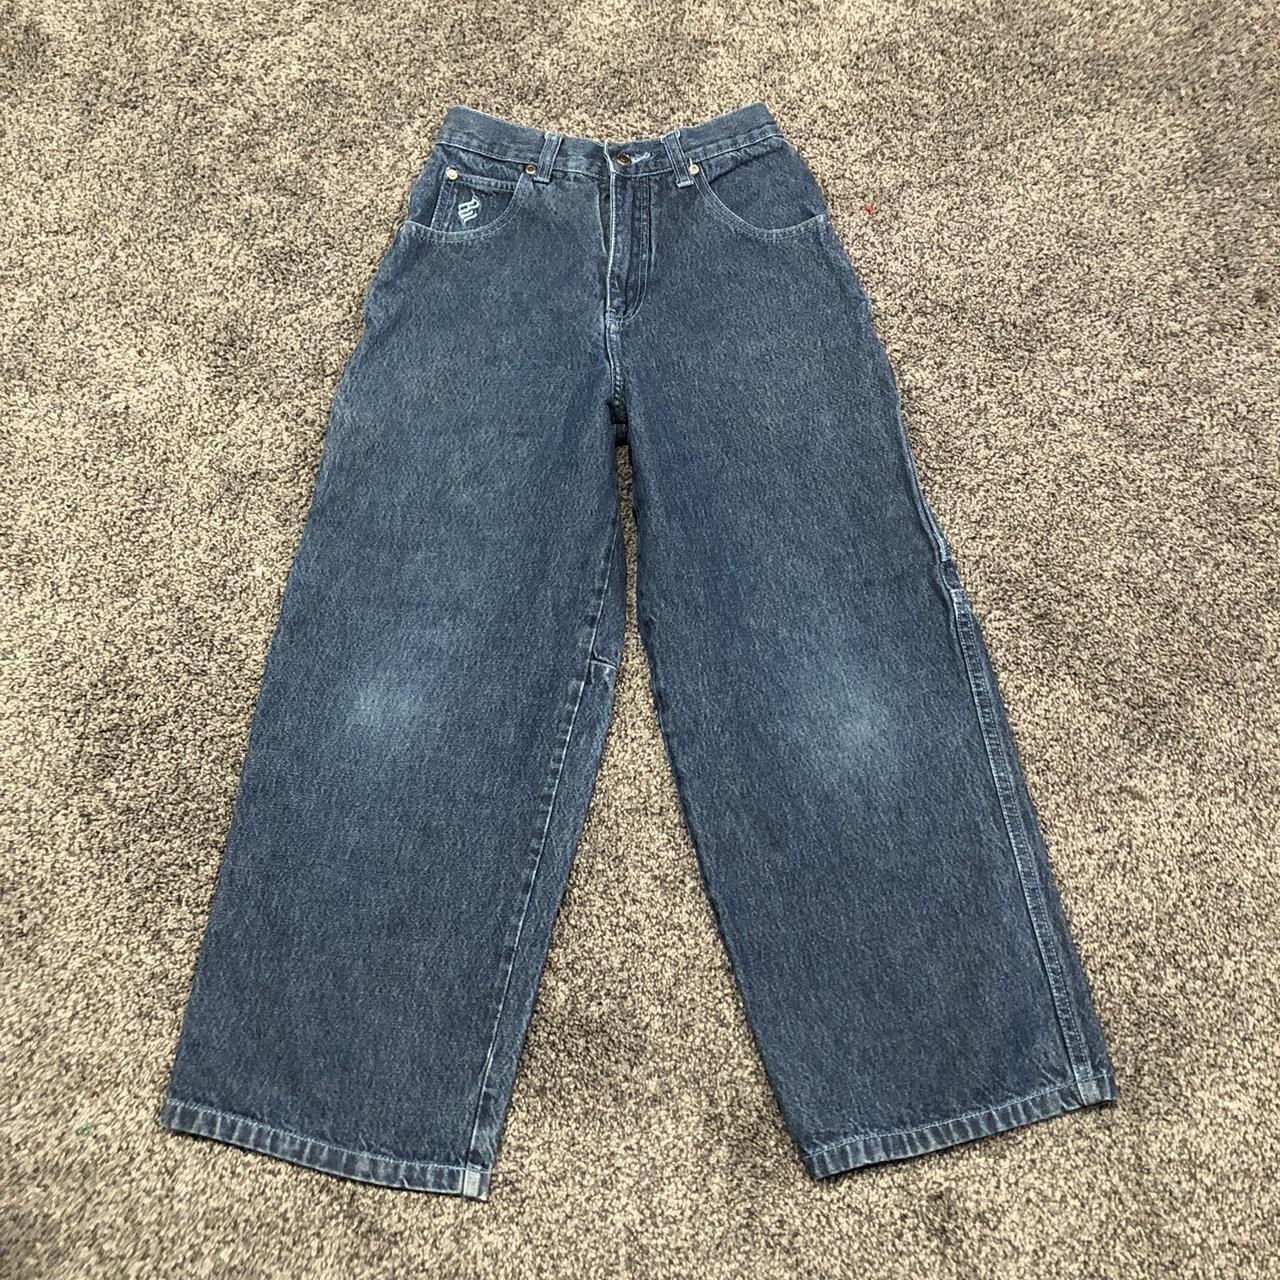 Kids rocawear jeans Super cool and in good condition - Depop